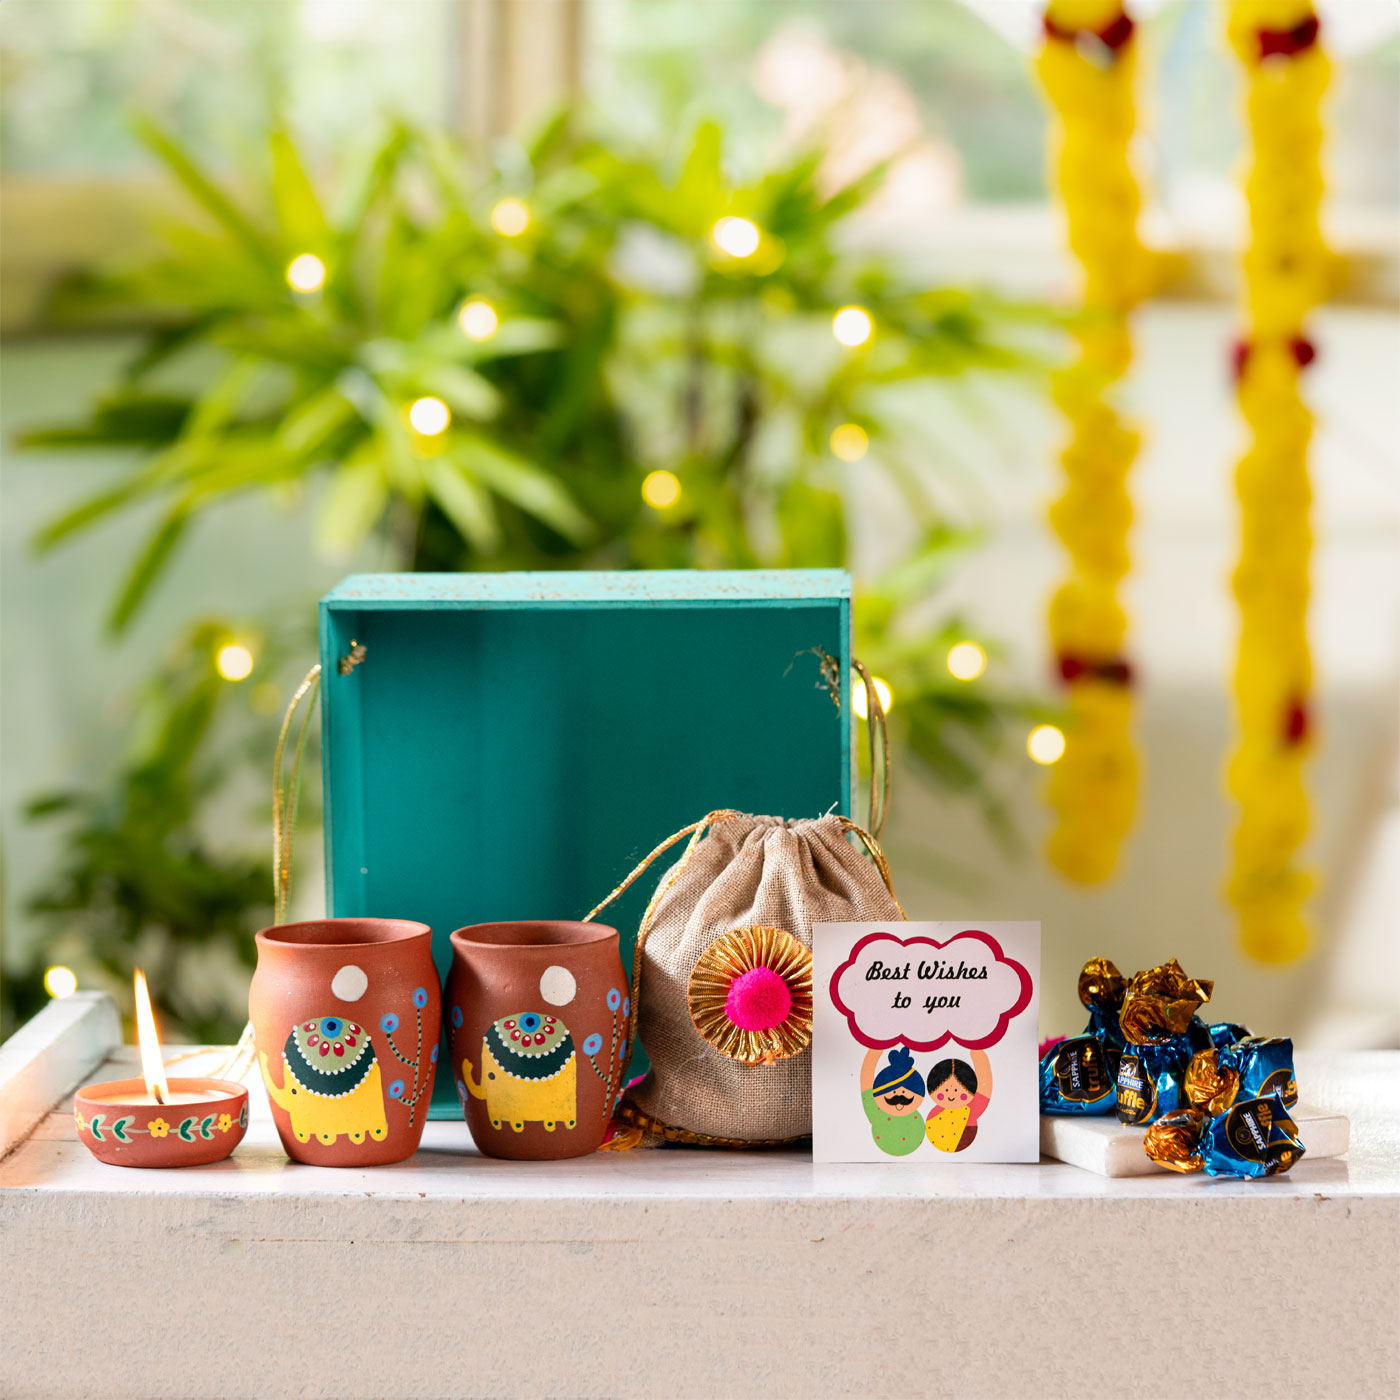 Move over sweets, get something useful, creative for Diwali gifts